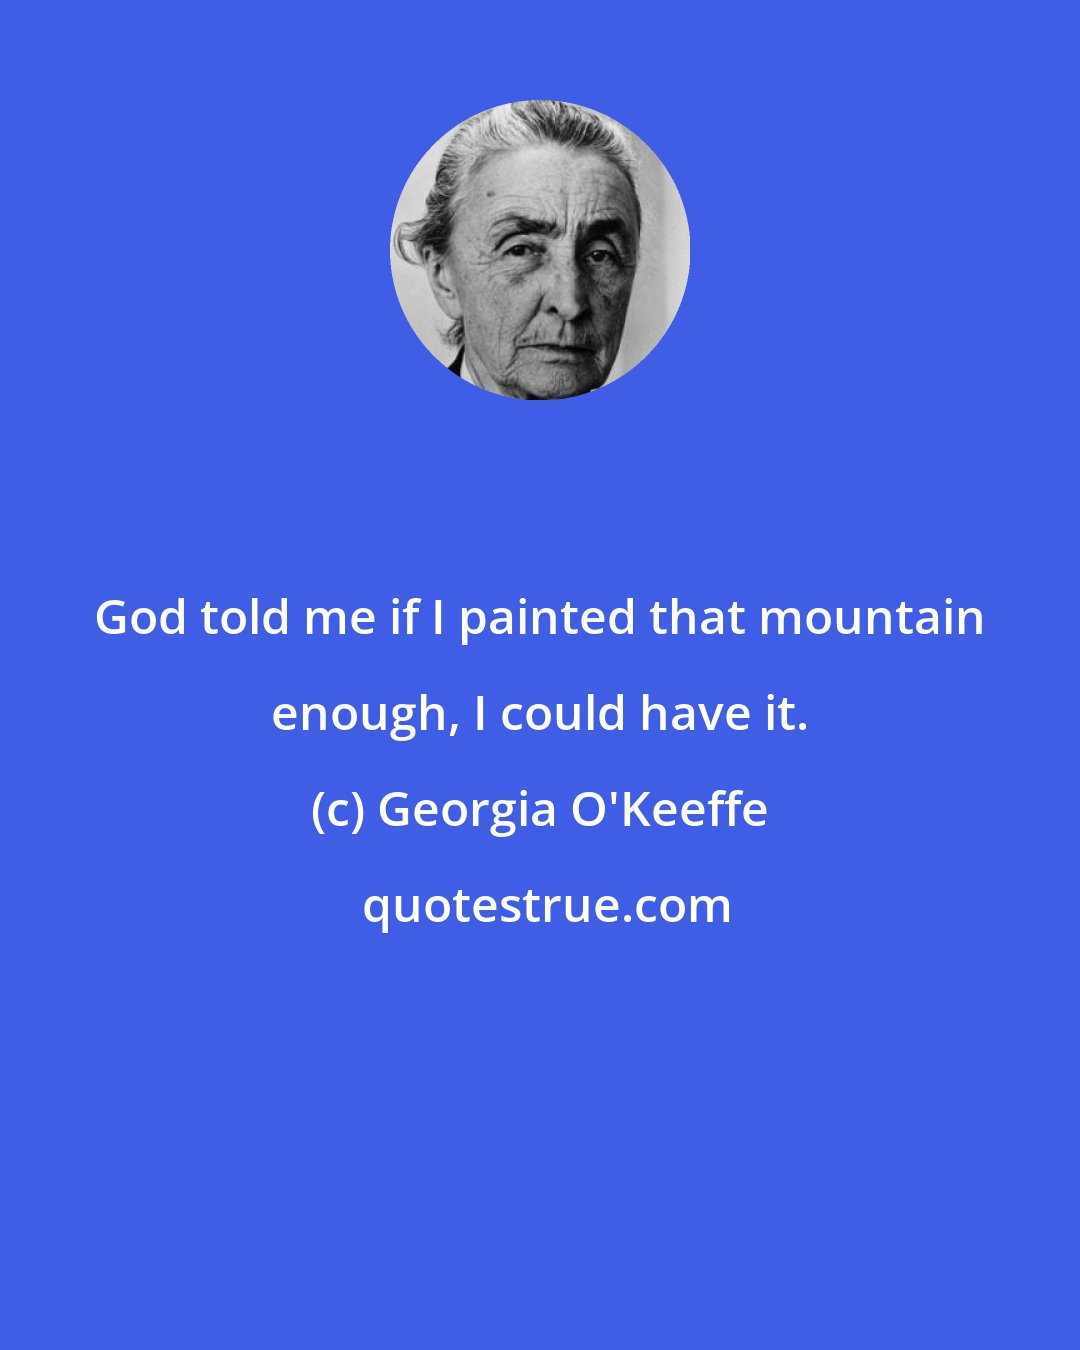 Georgia O'Keeffe: God told me if I painted that mountain enough, I could have it.